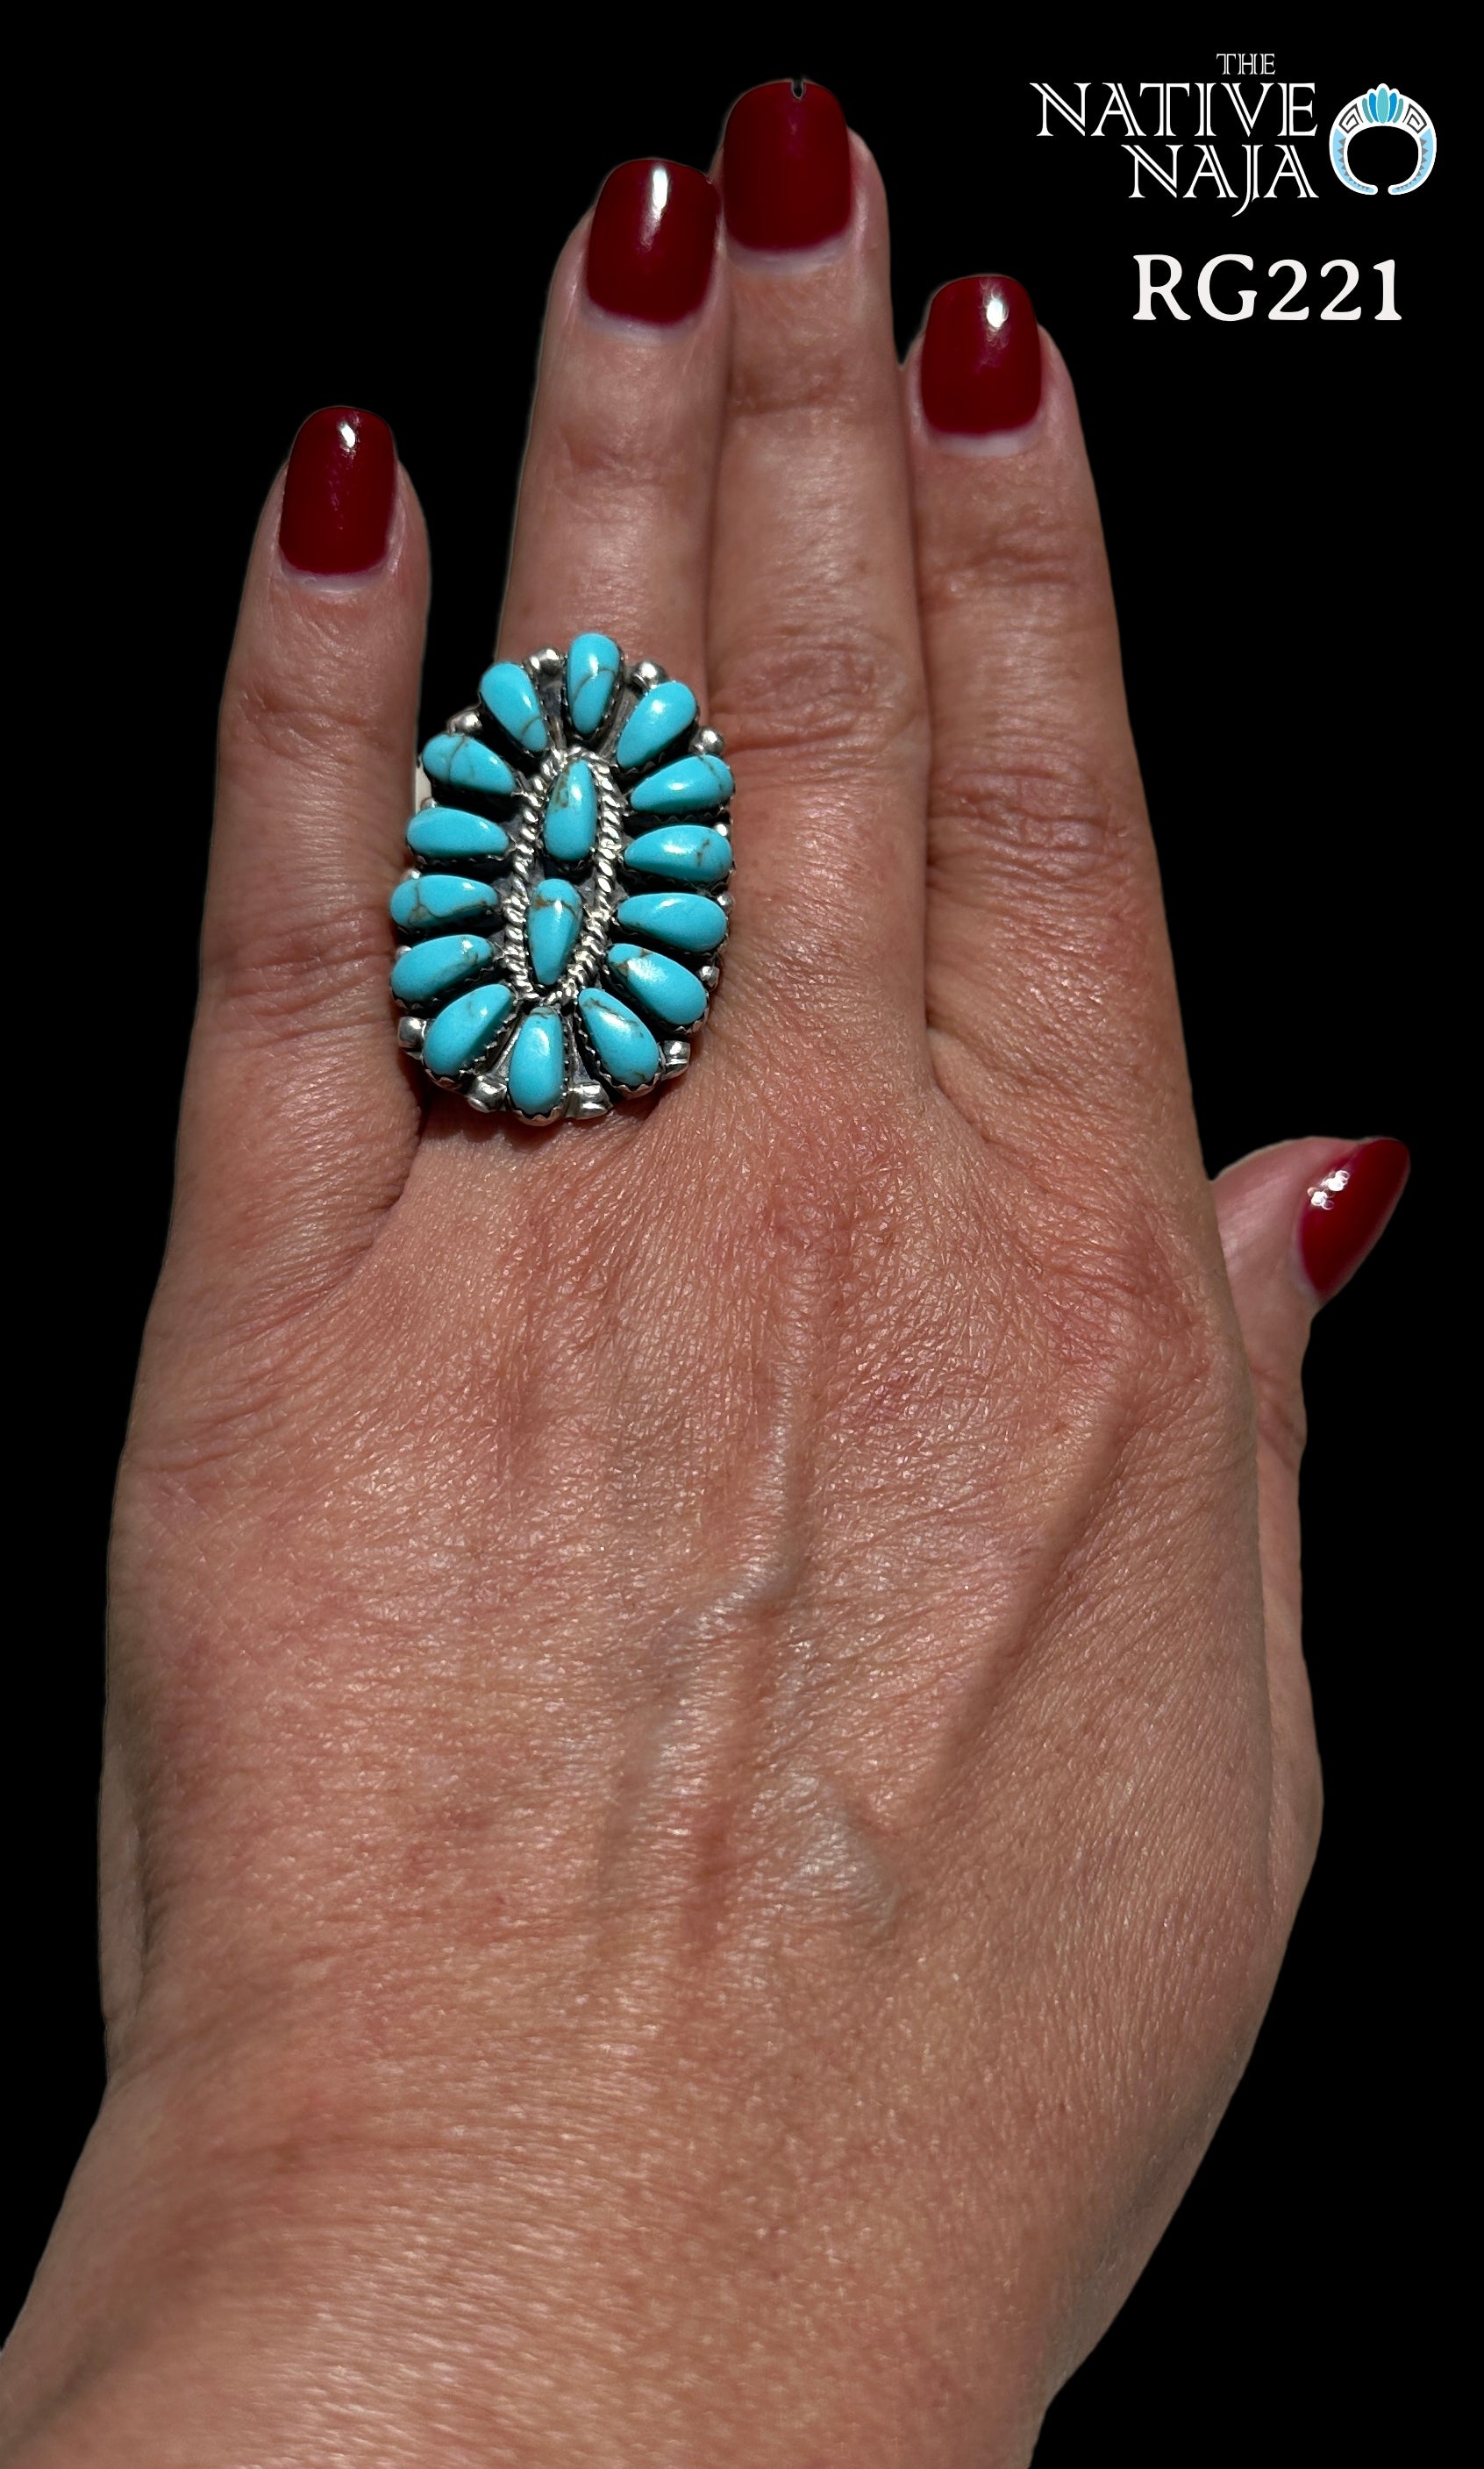 Large Navajo Jesse Williams Oval Petit Point Turquoise & Sterling Silver Ring Size 9 3/4 RG221